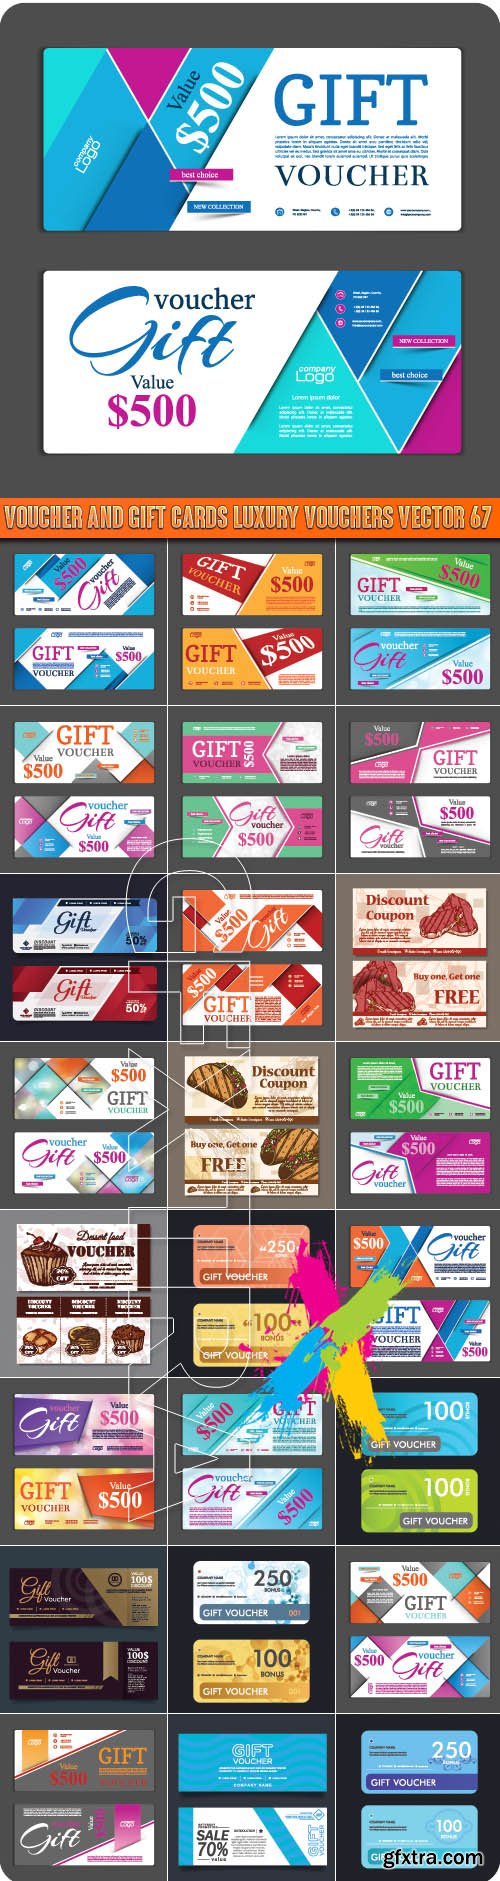 Voucher and gift cards luxury vouchers vector 67